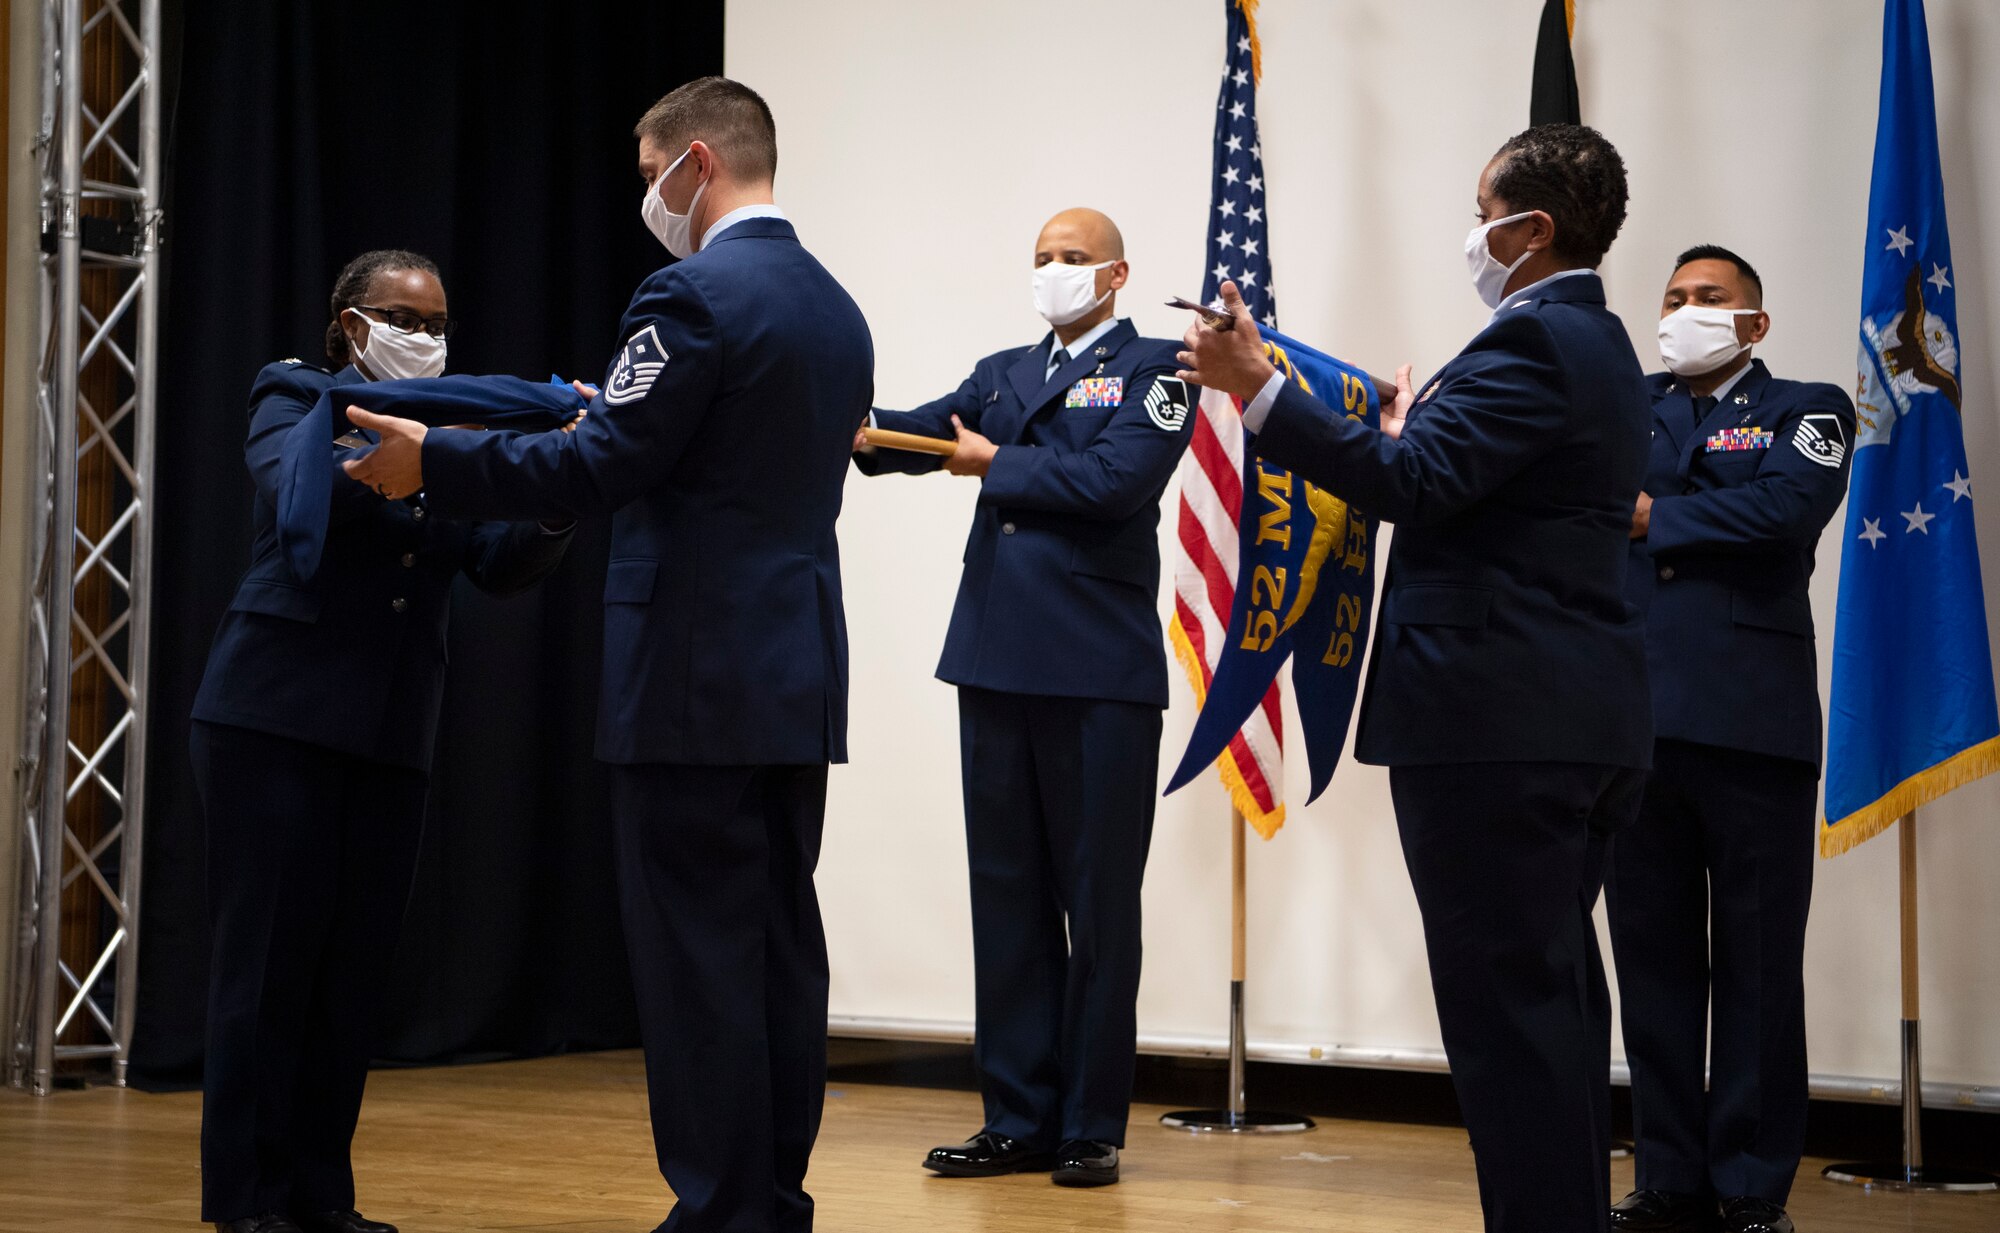 The ceremony re-designated the squadron as the 52nd Health Care Operations Squadron